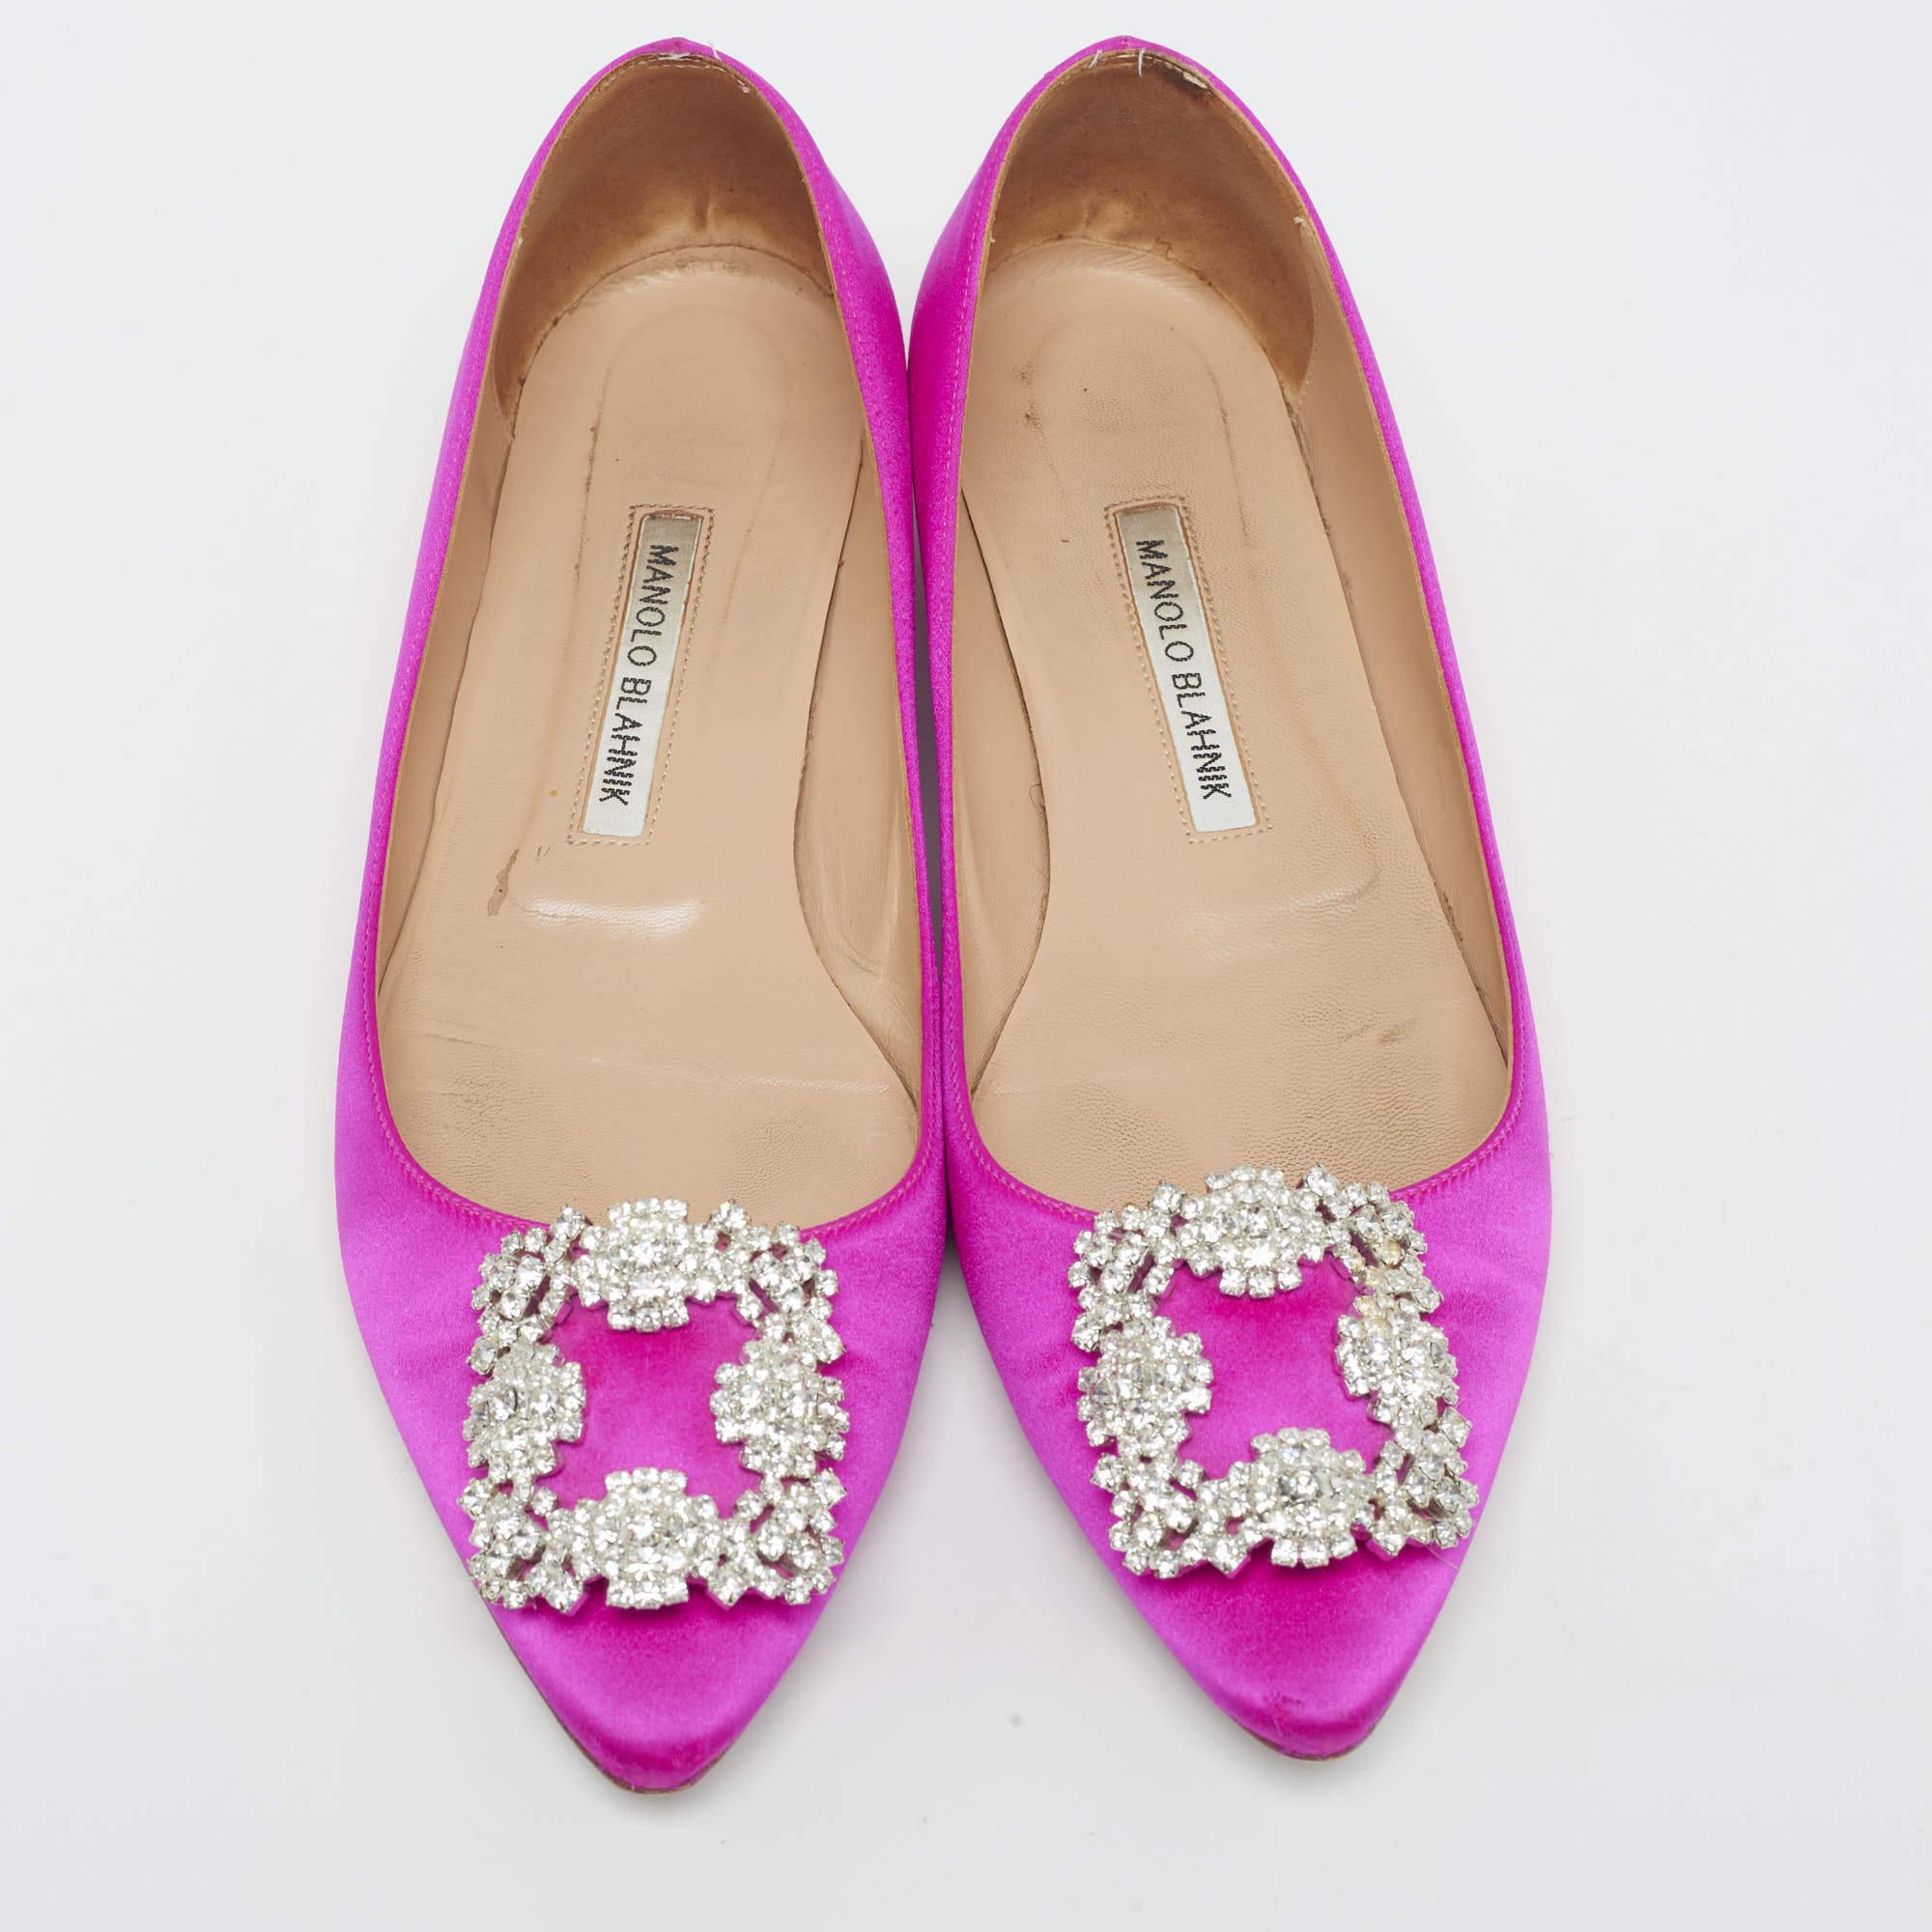 These ballet flats by Manolo Blahnik are comfortable and chic to be matched with everything from a shirt dress to skinny jeans. Crafted from pink satin, they feature covered toes along with the signature buckle on the vamps.

Includes: Original